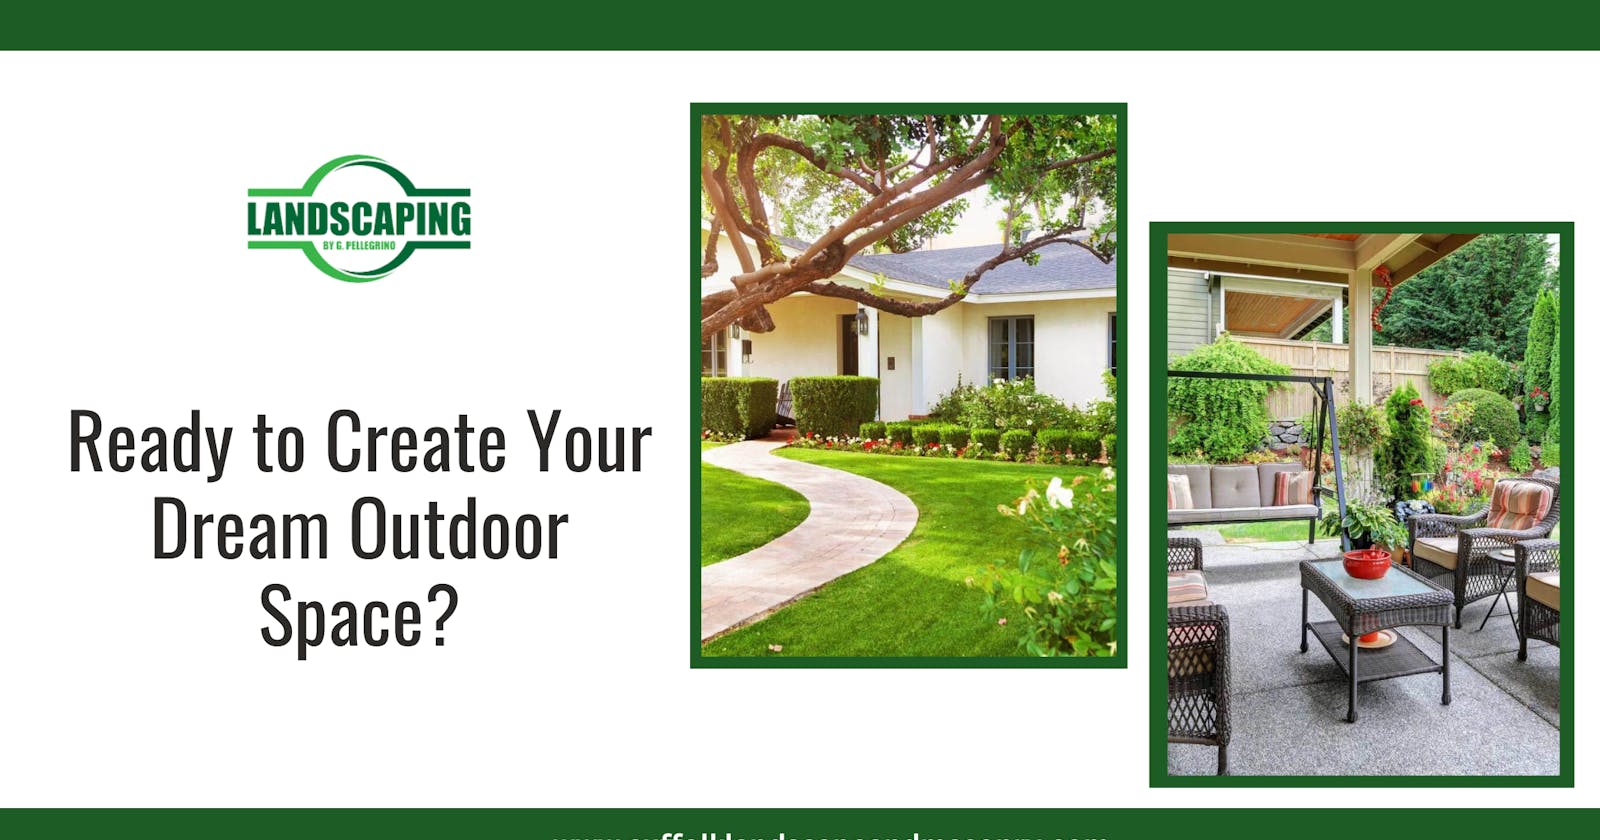 Ready to Create Your Dream Outdoor Space?